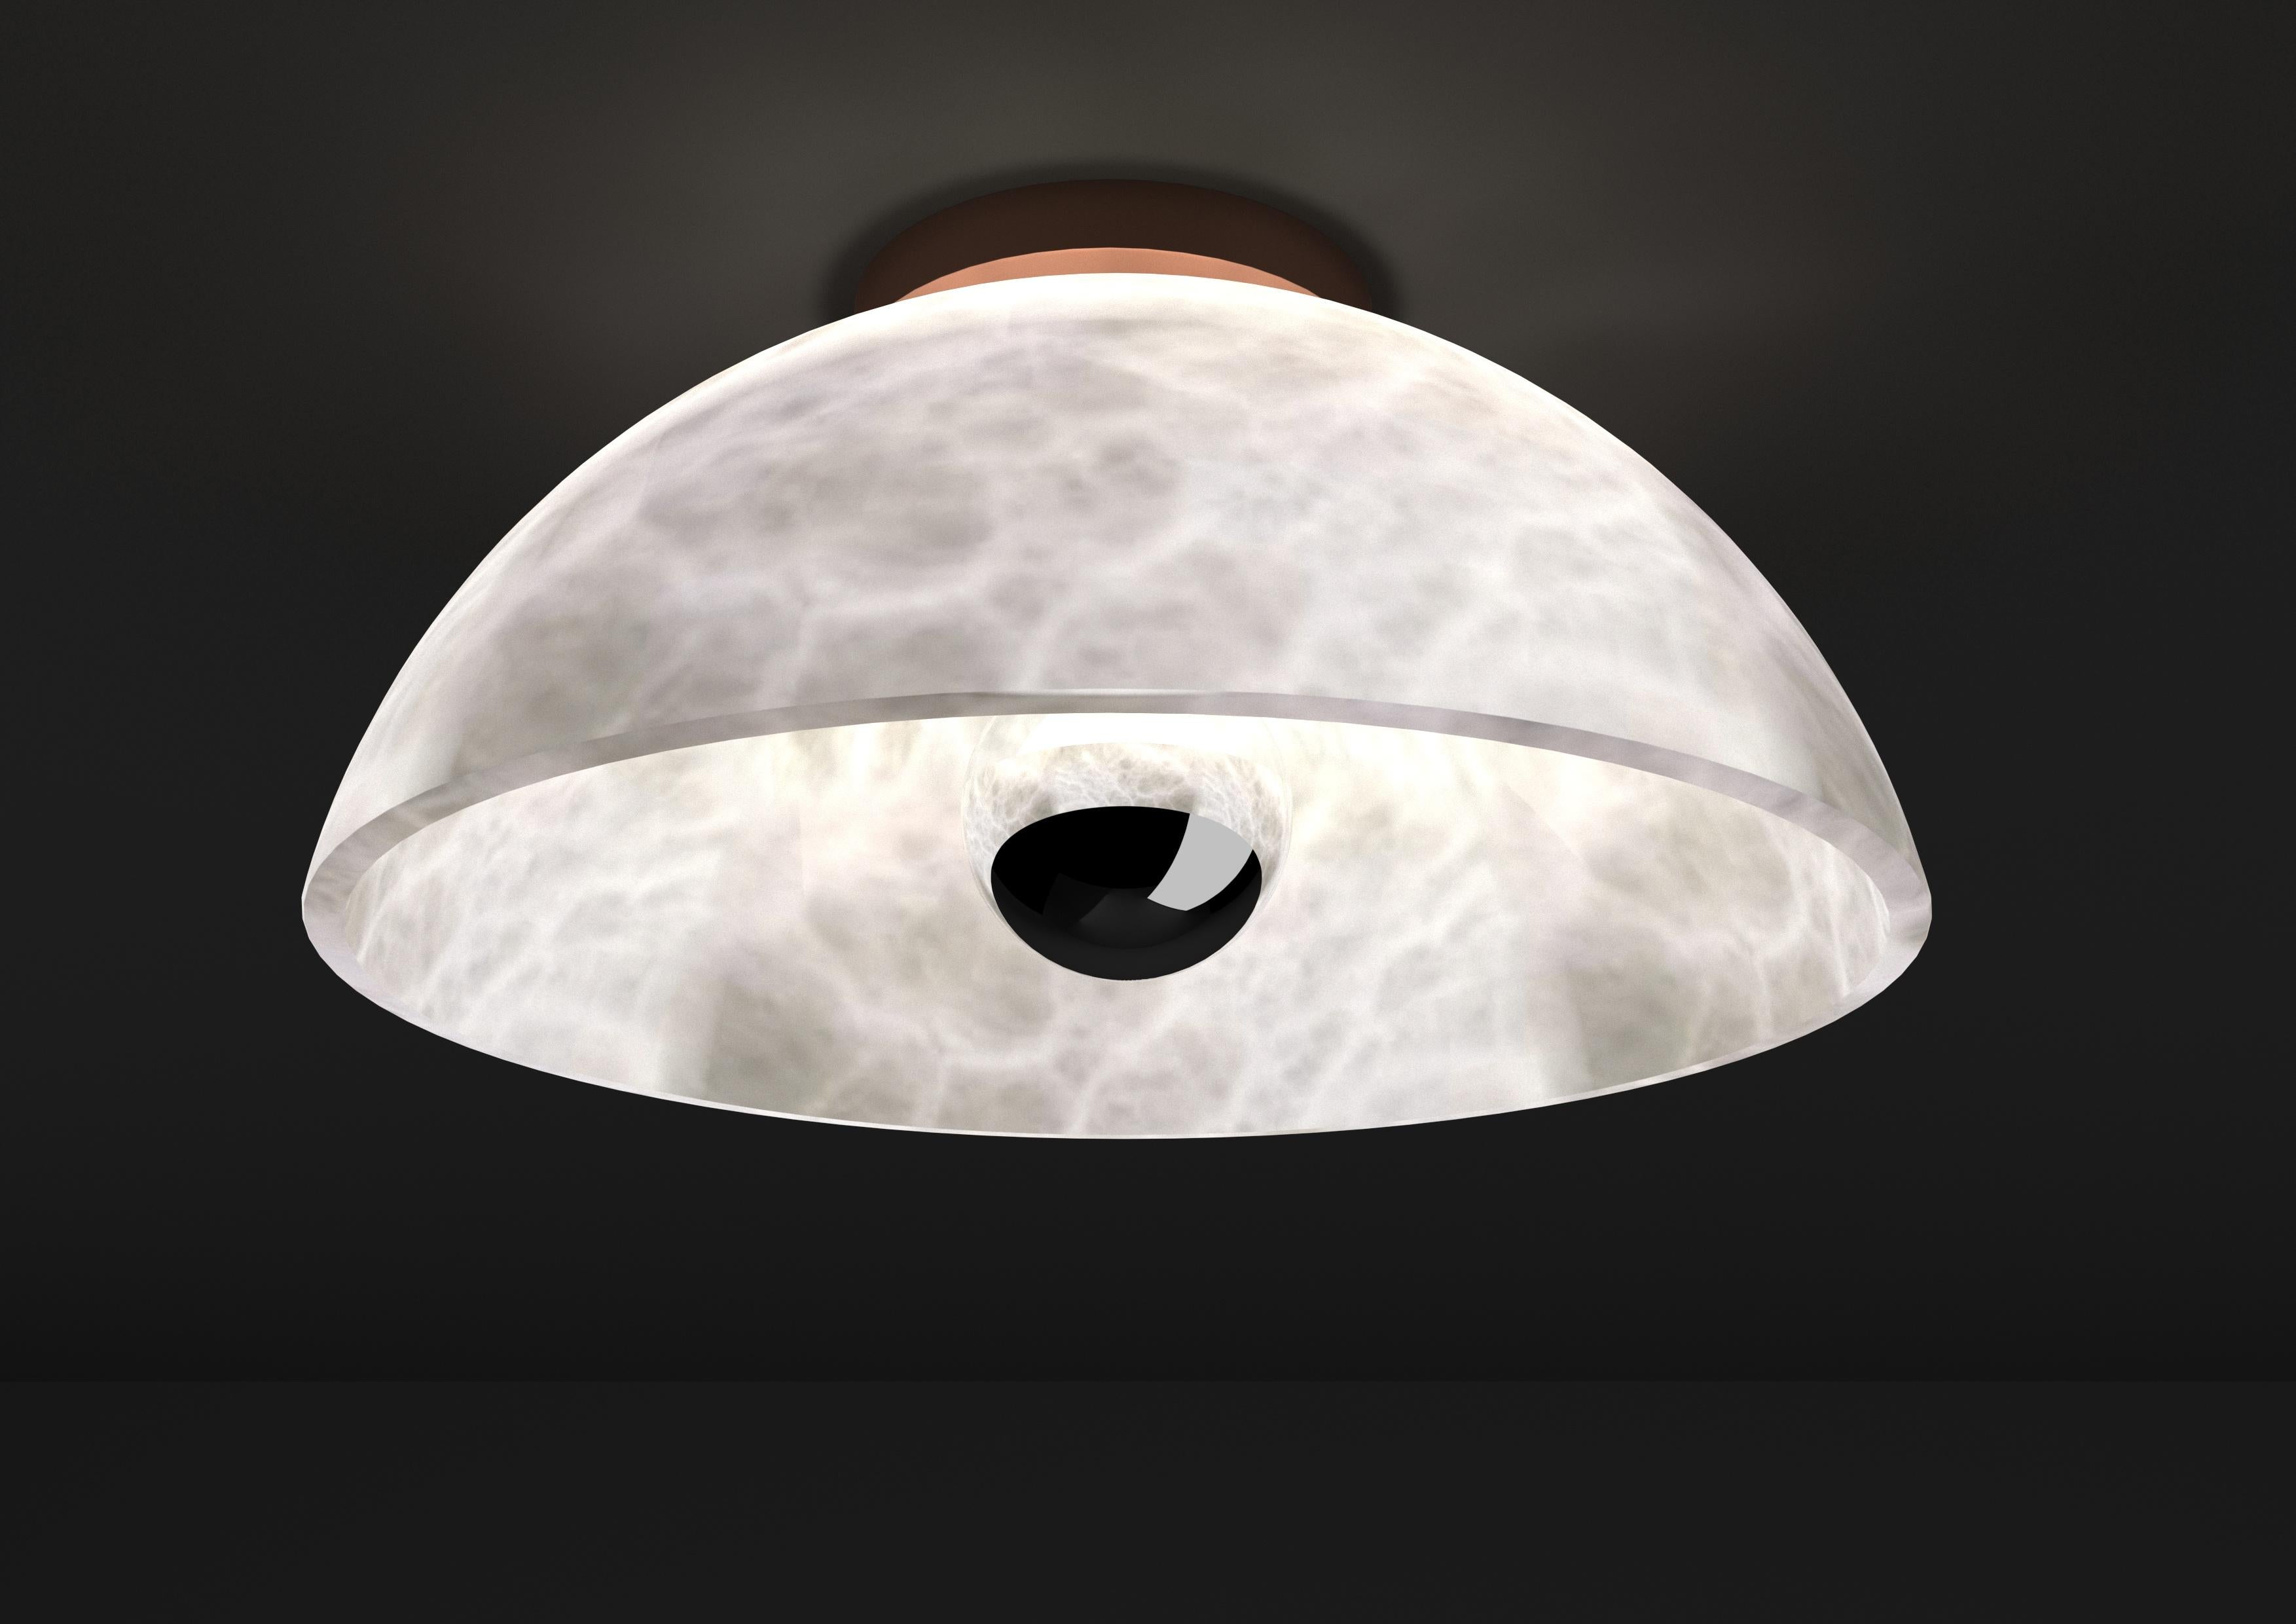 Apollo Copper Ceiling Lamp by Alabastro Italiano
Dimensions: Ø 30 x W 17,5 cm.
Materials: White alabaster and copper.

Available in different finishes: Shiny Silver, Bronze, Brushed Brass, Ruggine of Florence, Brushed Burnished, Shiny Gold, Brushed